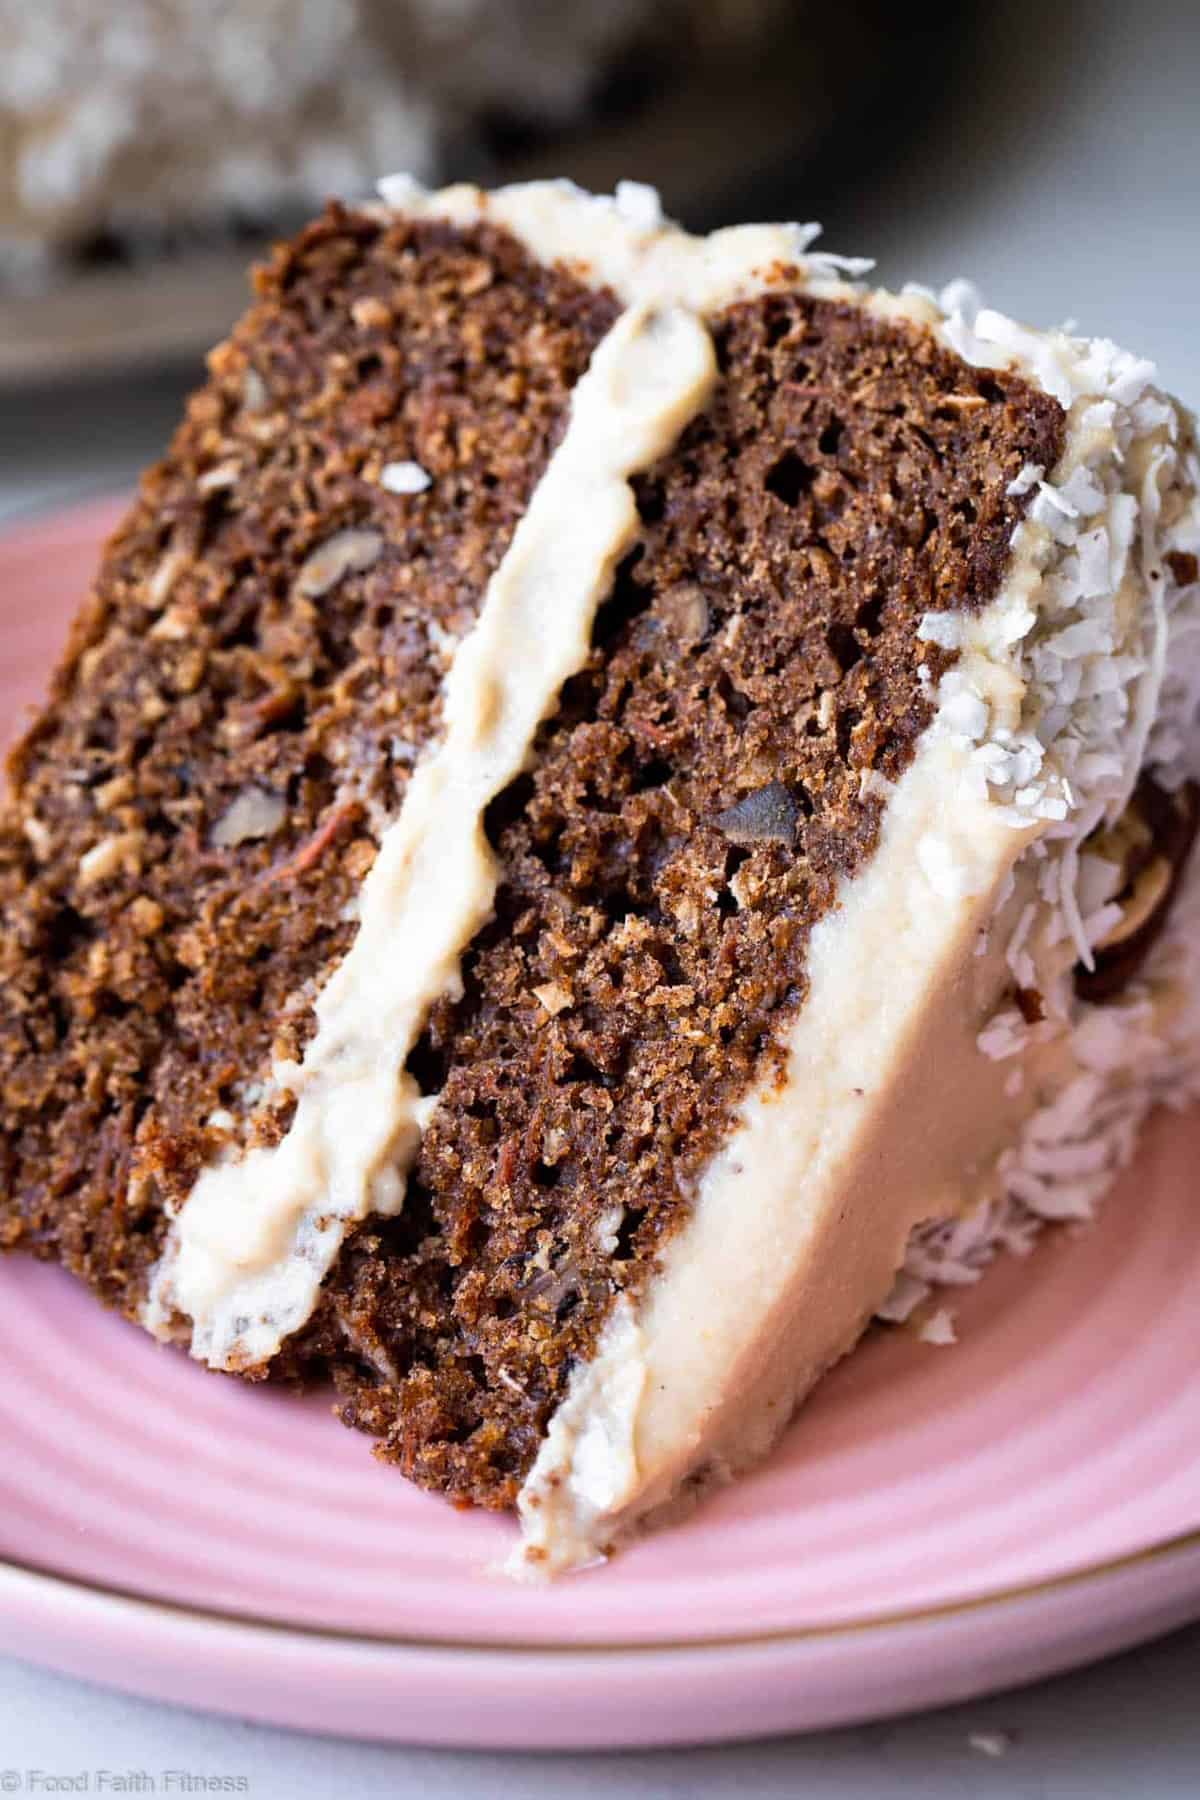 Paleo Carrot Cake - This dairy, grain and gluten free, Paleo Carrot Cake with Almond Flour has a luscious cashew "cream cheese" frosting and is easy to make! Always a hit with a crowd! | #Foodfaithfitness | #Glutenfree #Carrotcake #Paleo #Dairyfree #Healthy